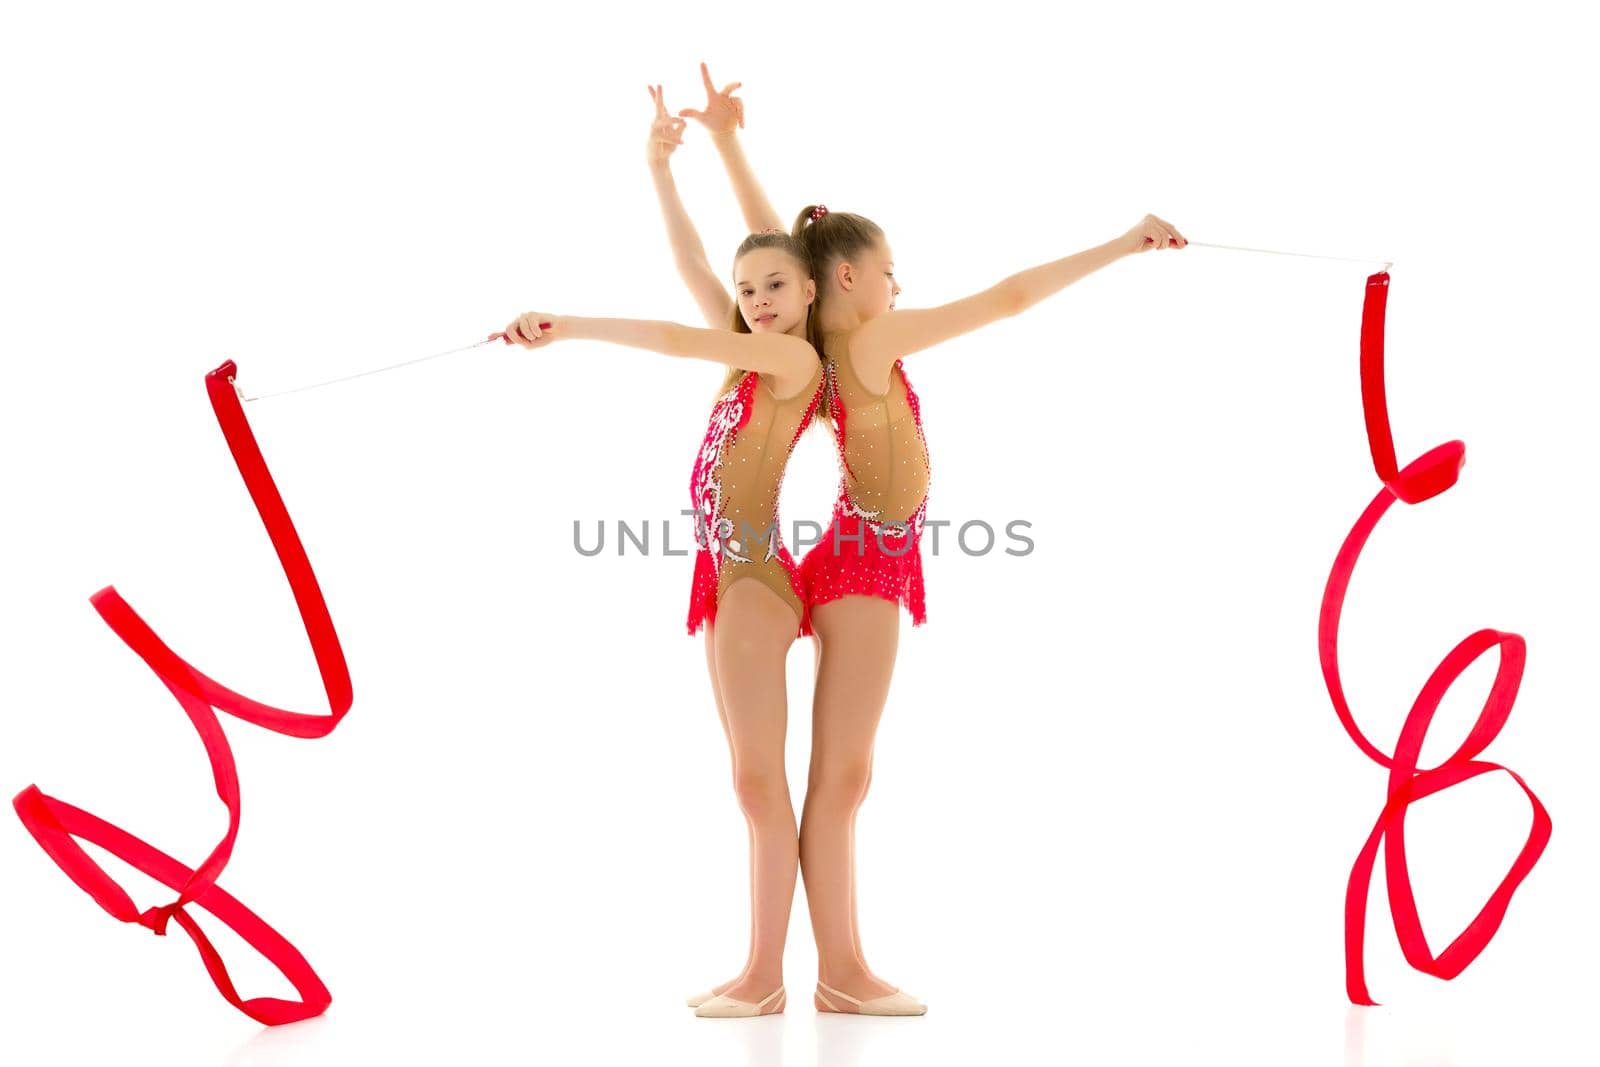 Two charming girls gymnasts, beautiful costumes for the competition, perform synchronized movements with a ribbon. The concept of children's sport, fitness. Isolated on a white background.